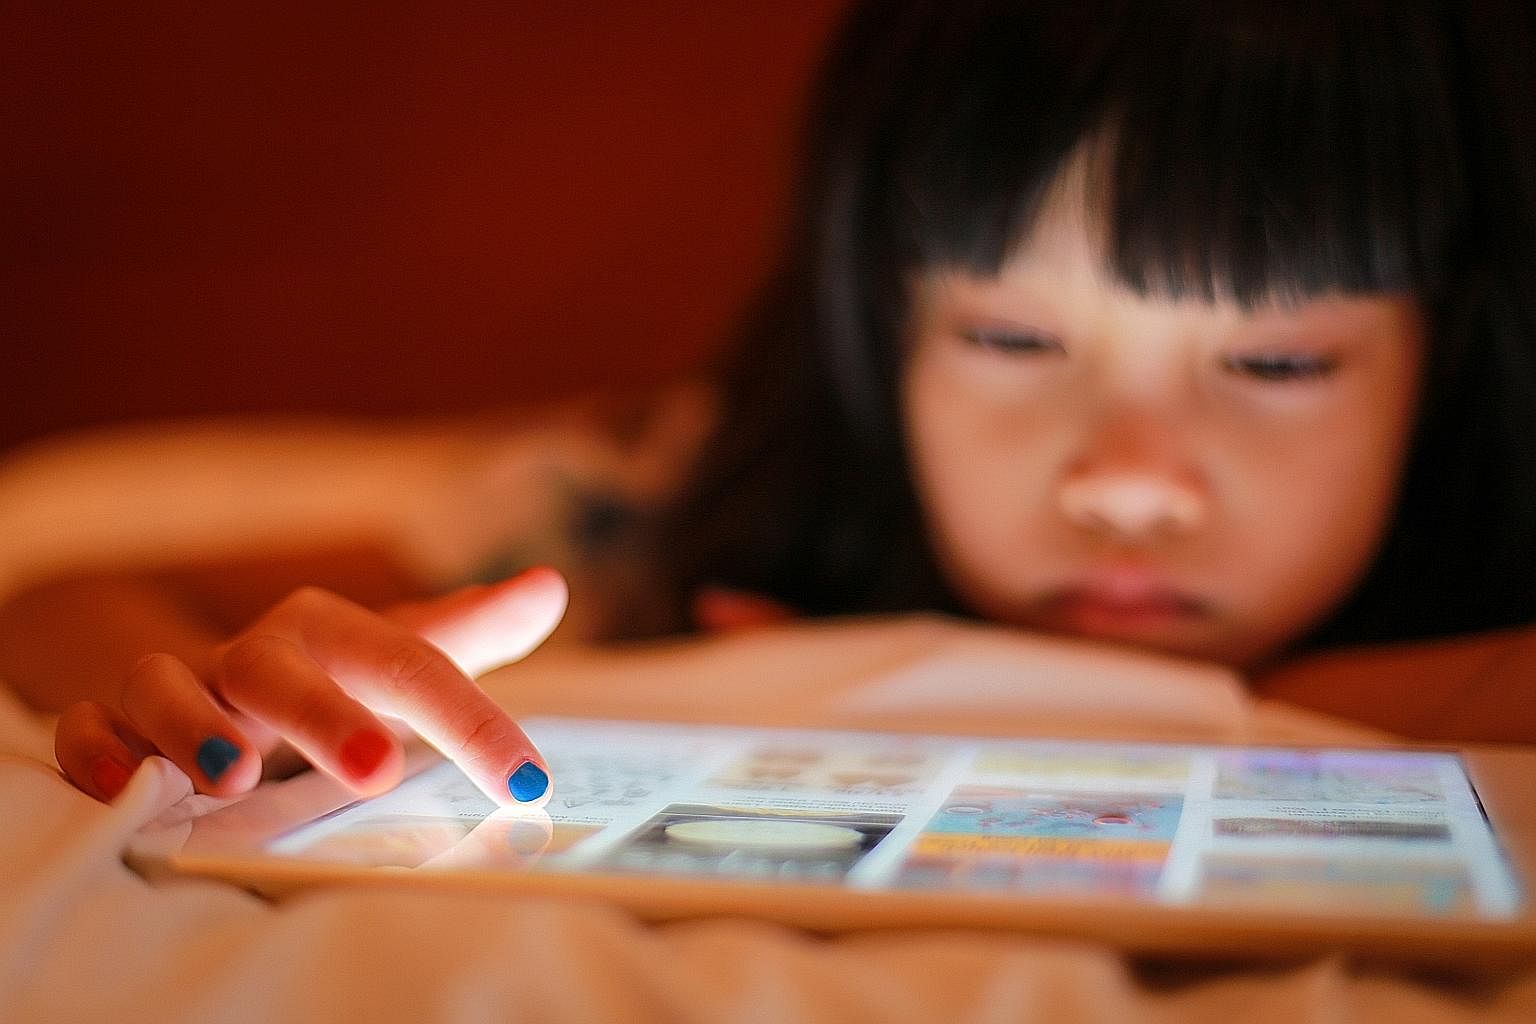 According to a study by the Singapore Eye Research Institute, childhood myopia is largely attributed to frequent near-work activities done with handheld devices such as iPads.